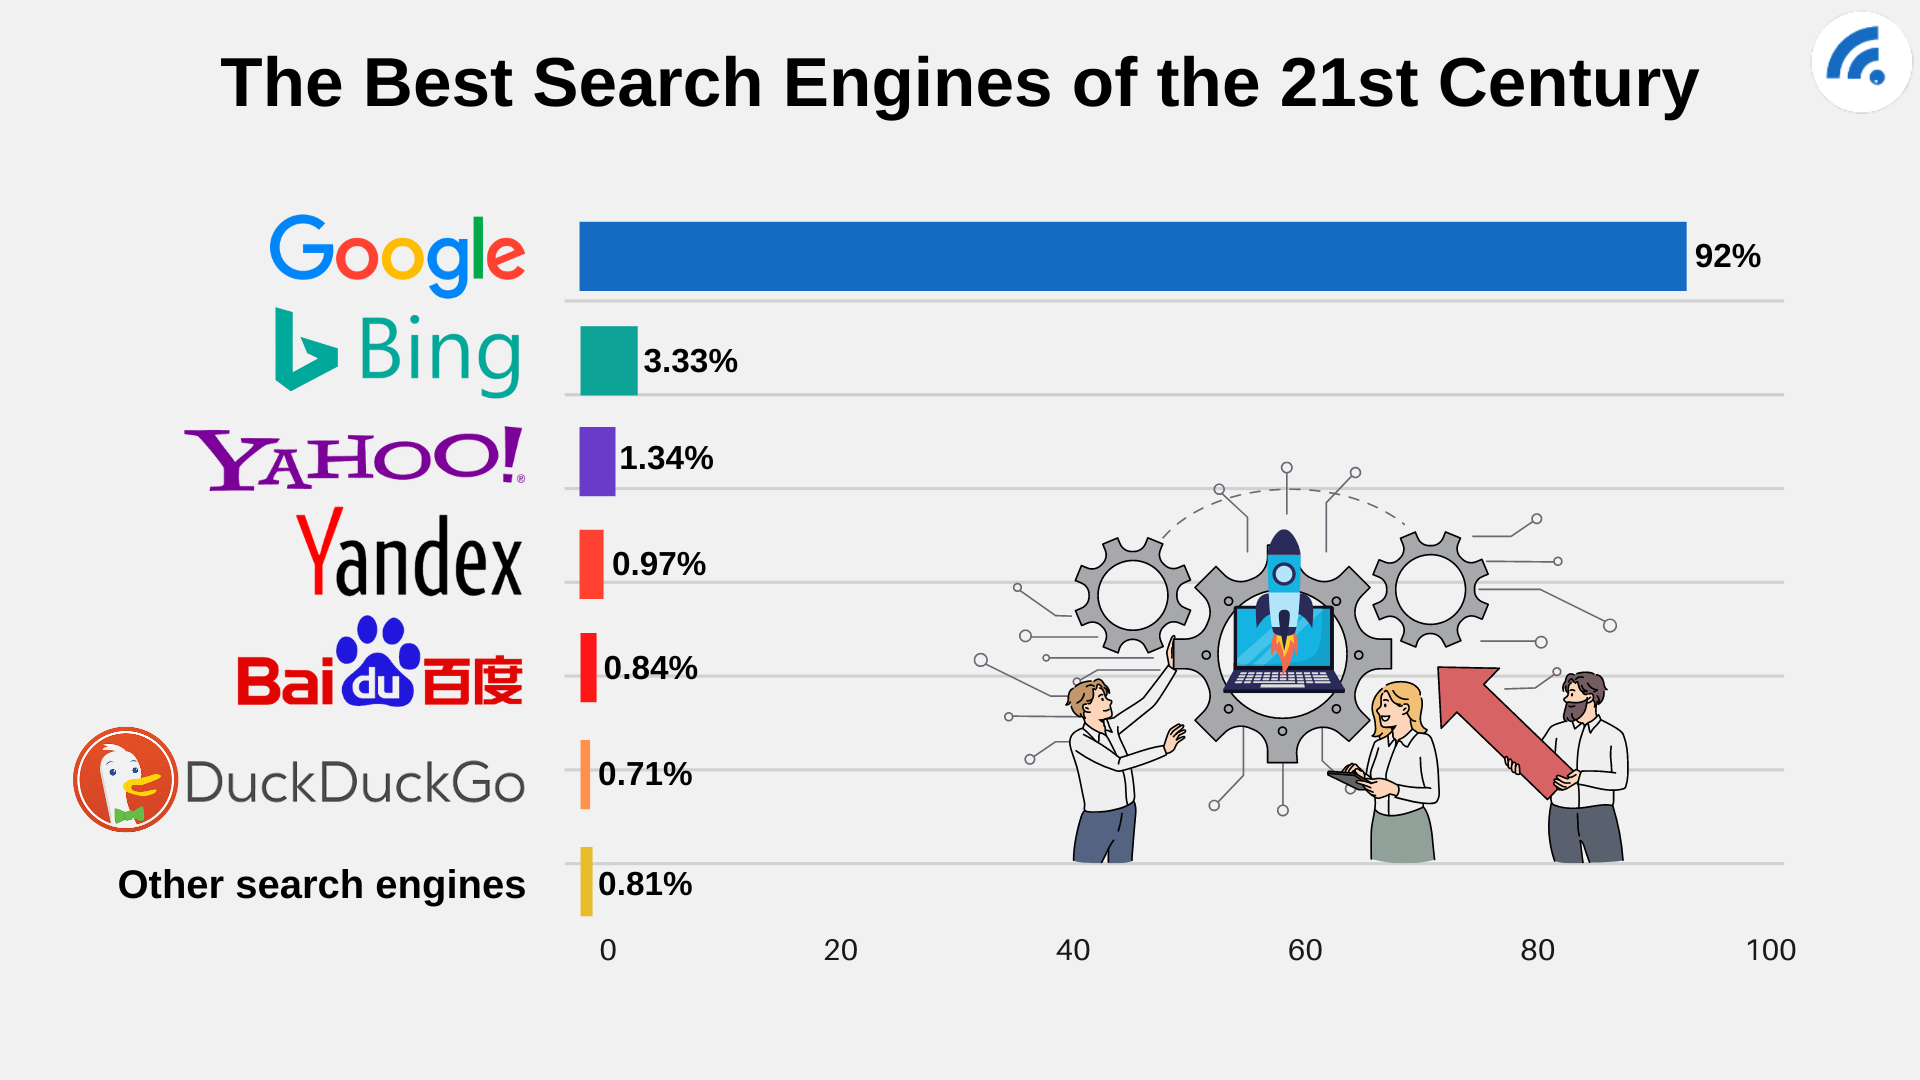 What is the biggest search engine after Google?